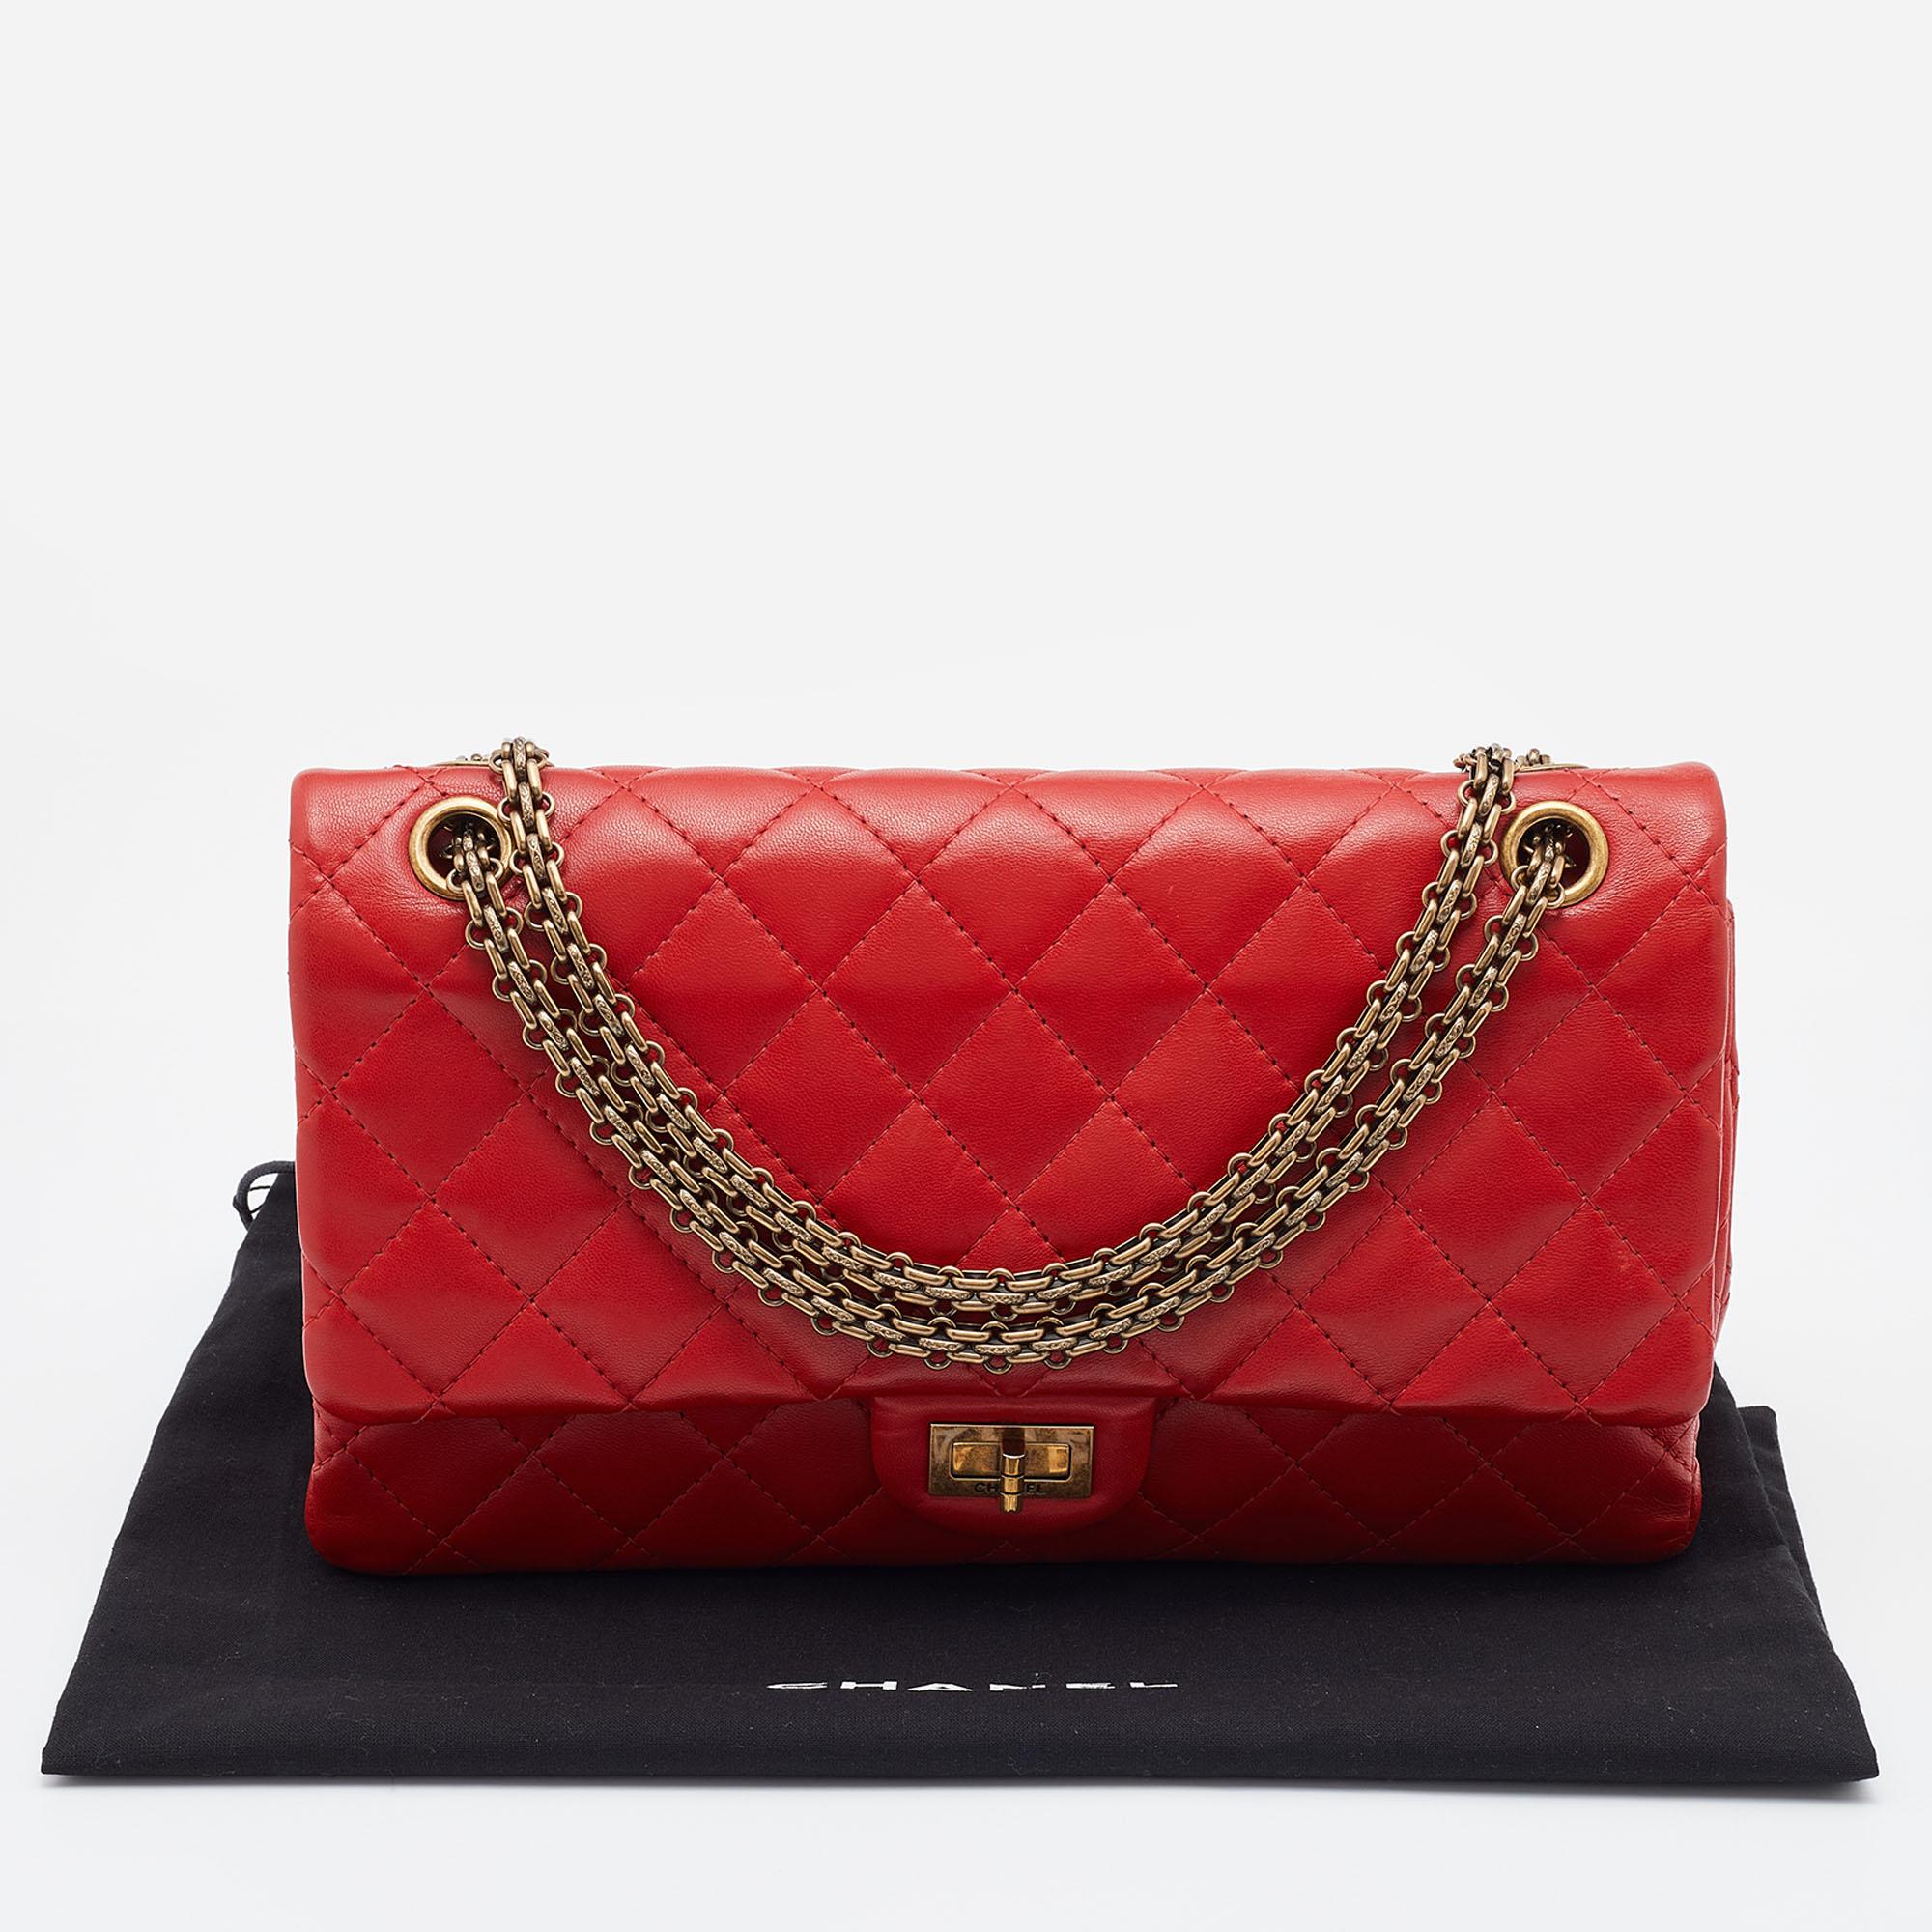 Chanel Red Lipstick Quilted Leather Reissue 2.55 Classic 226 Flap Bag 4